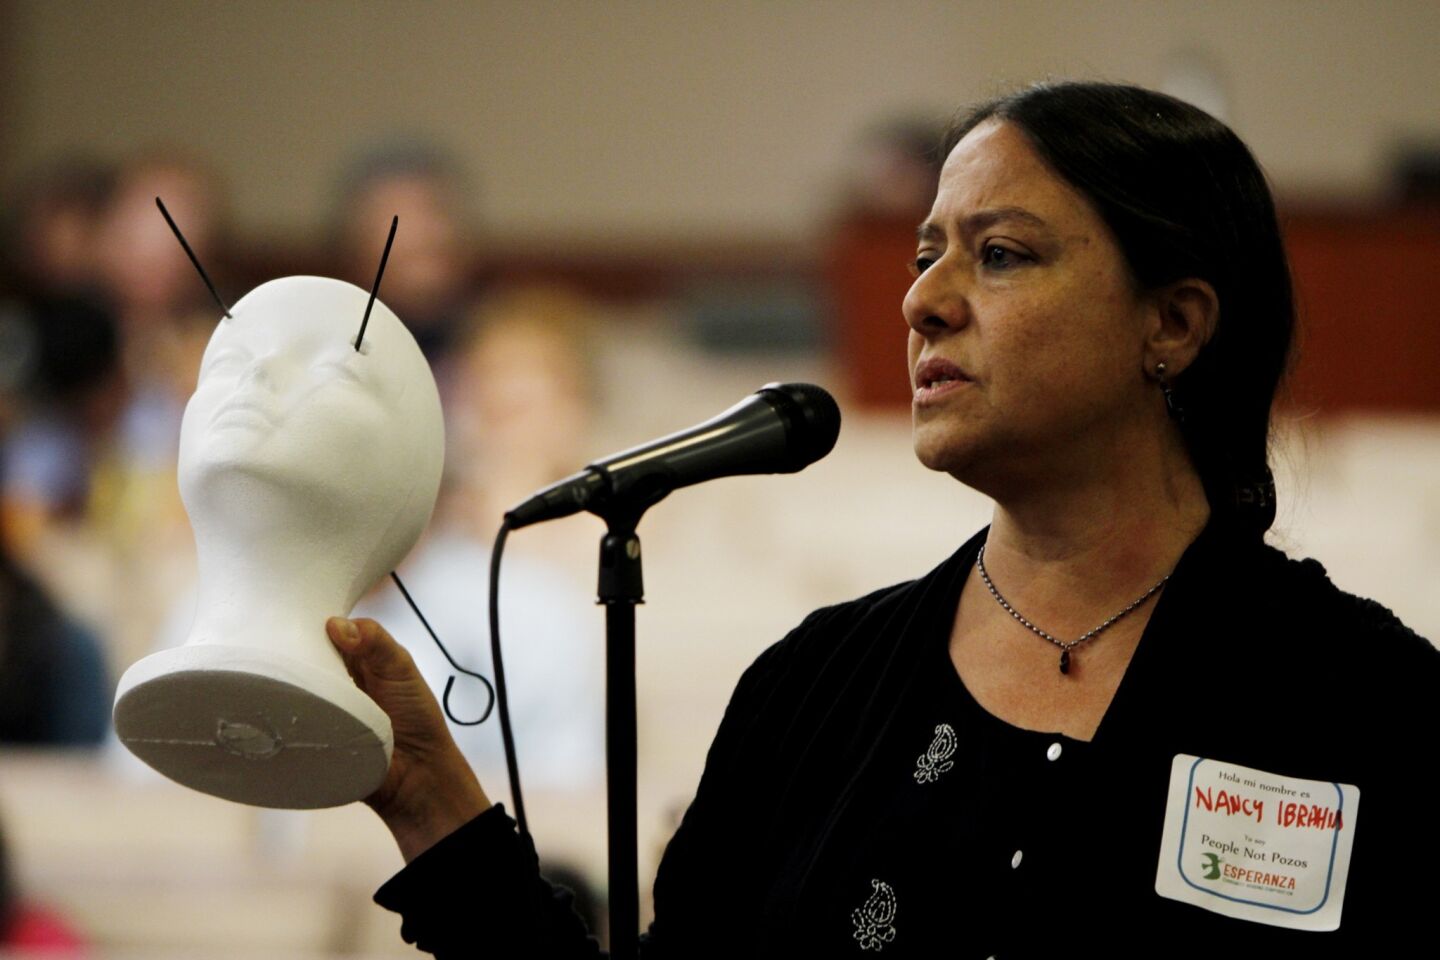 Nancy Halpern Ibrahim, executive director of Esperanza Community Housing Corp., speaks during a town hall meeting concerning fumes from a South Los Angeles oil field. She holds a model that she says depicts some of the symptoms, including headaches and nose bleeds, that people living near the field are experiencing.